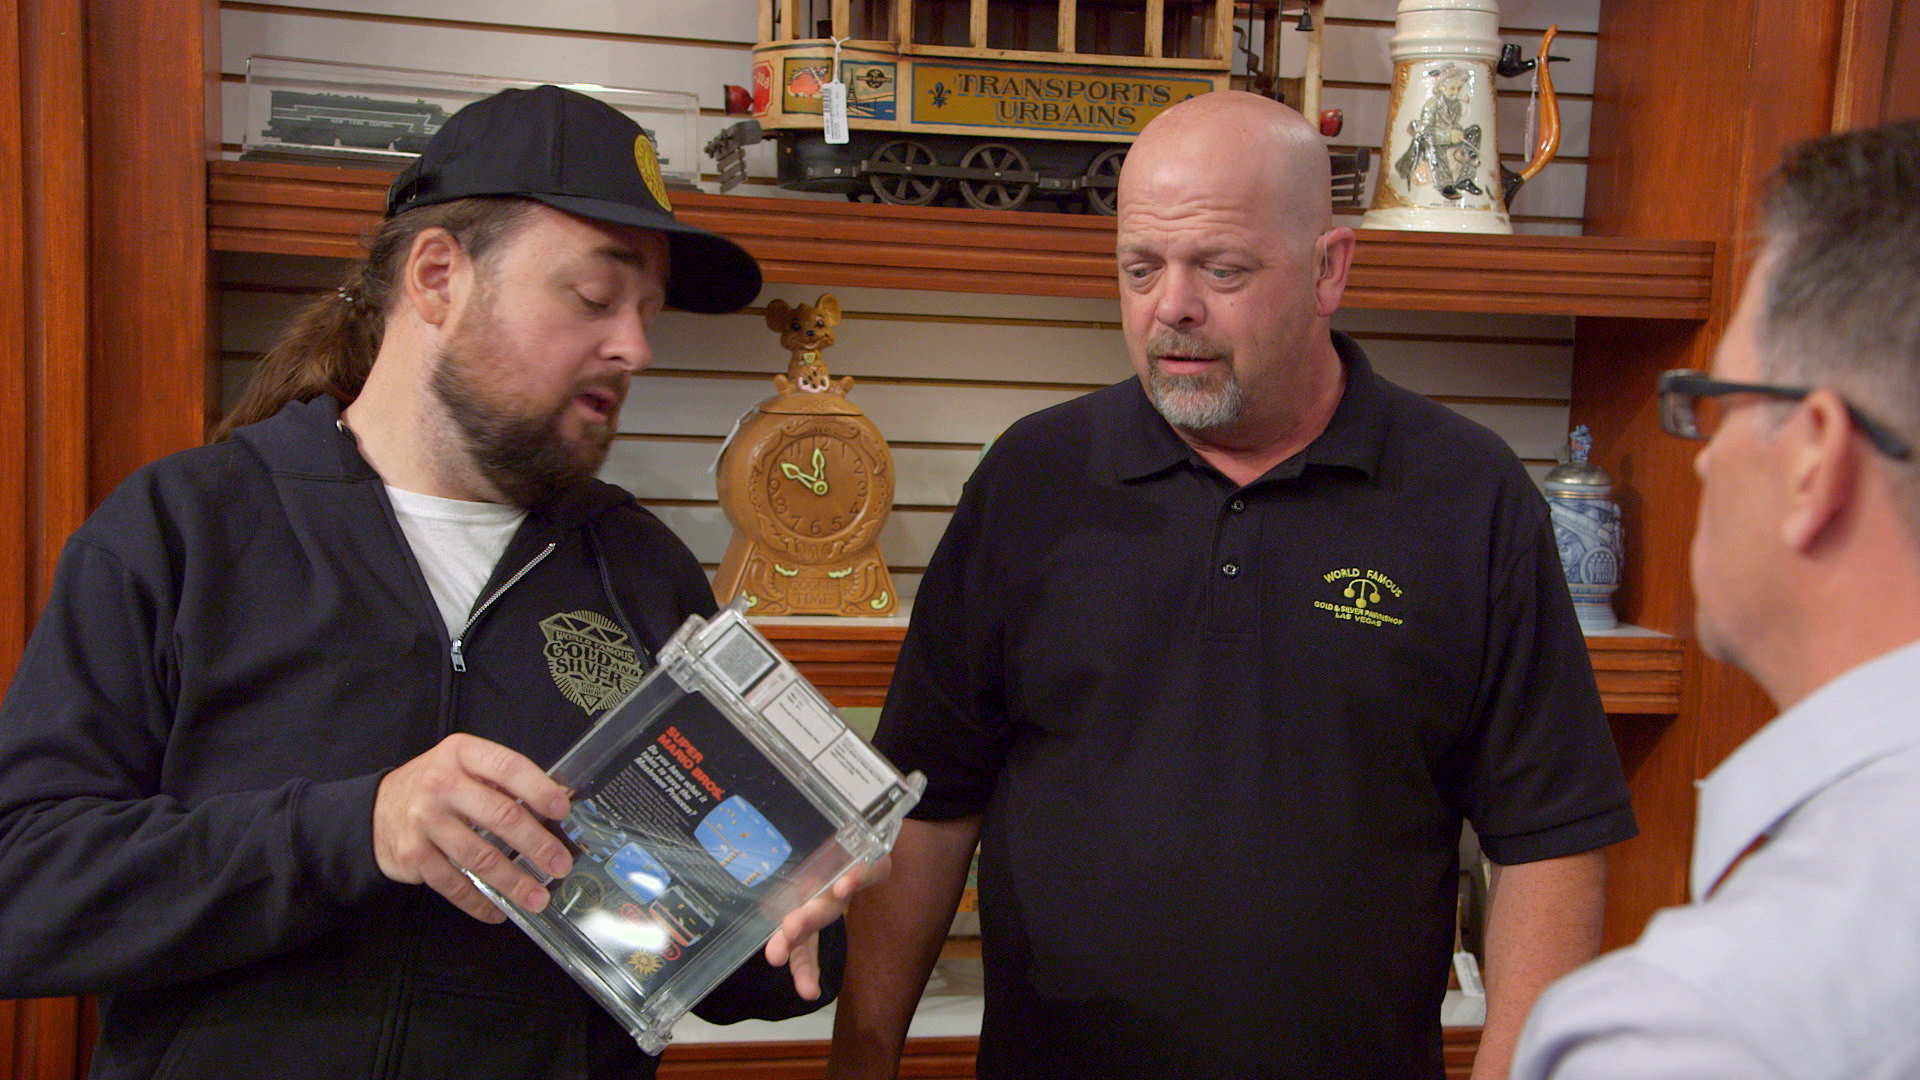 Pawn Stars - Plugged In